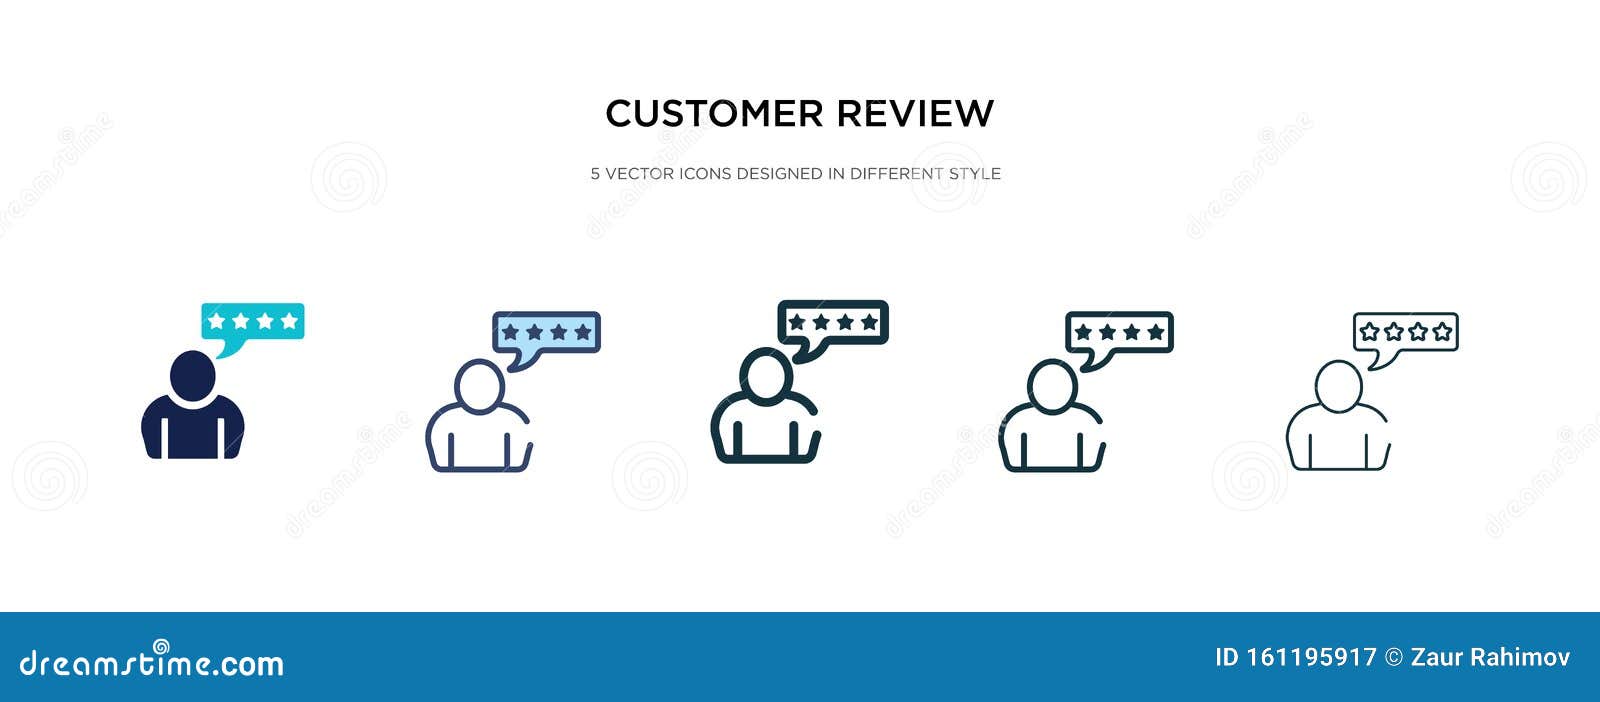 Customer review icon in different style vector illustration. two colored an...